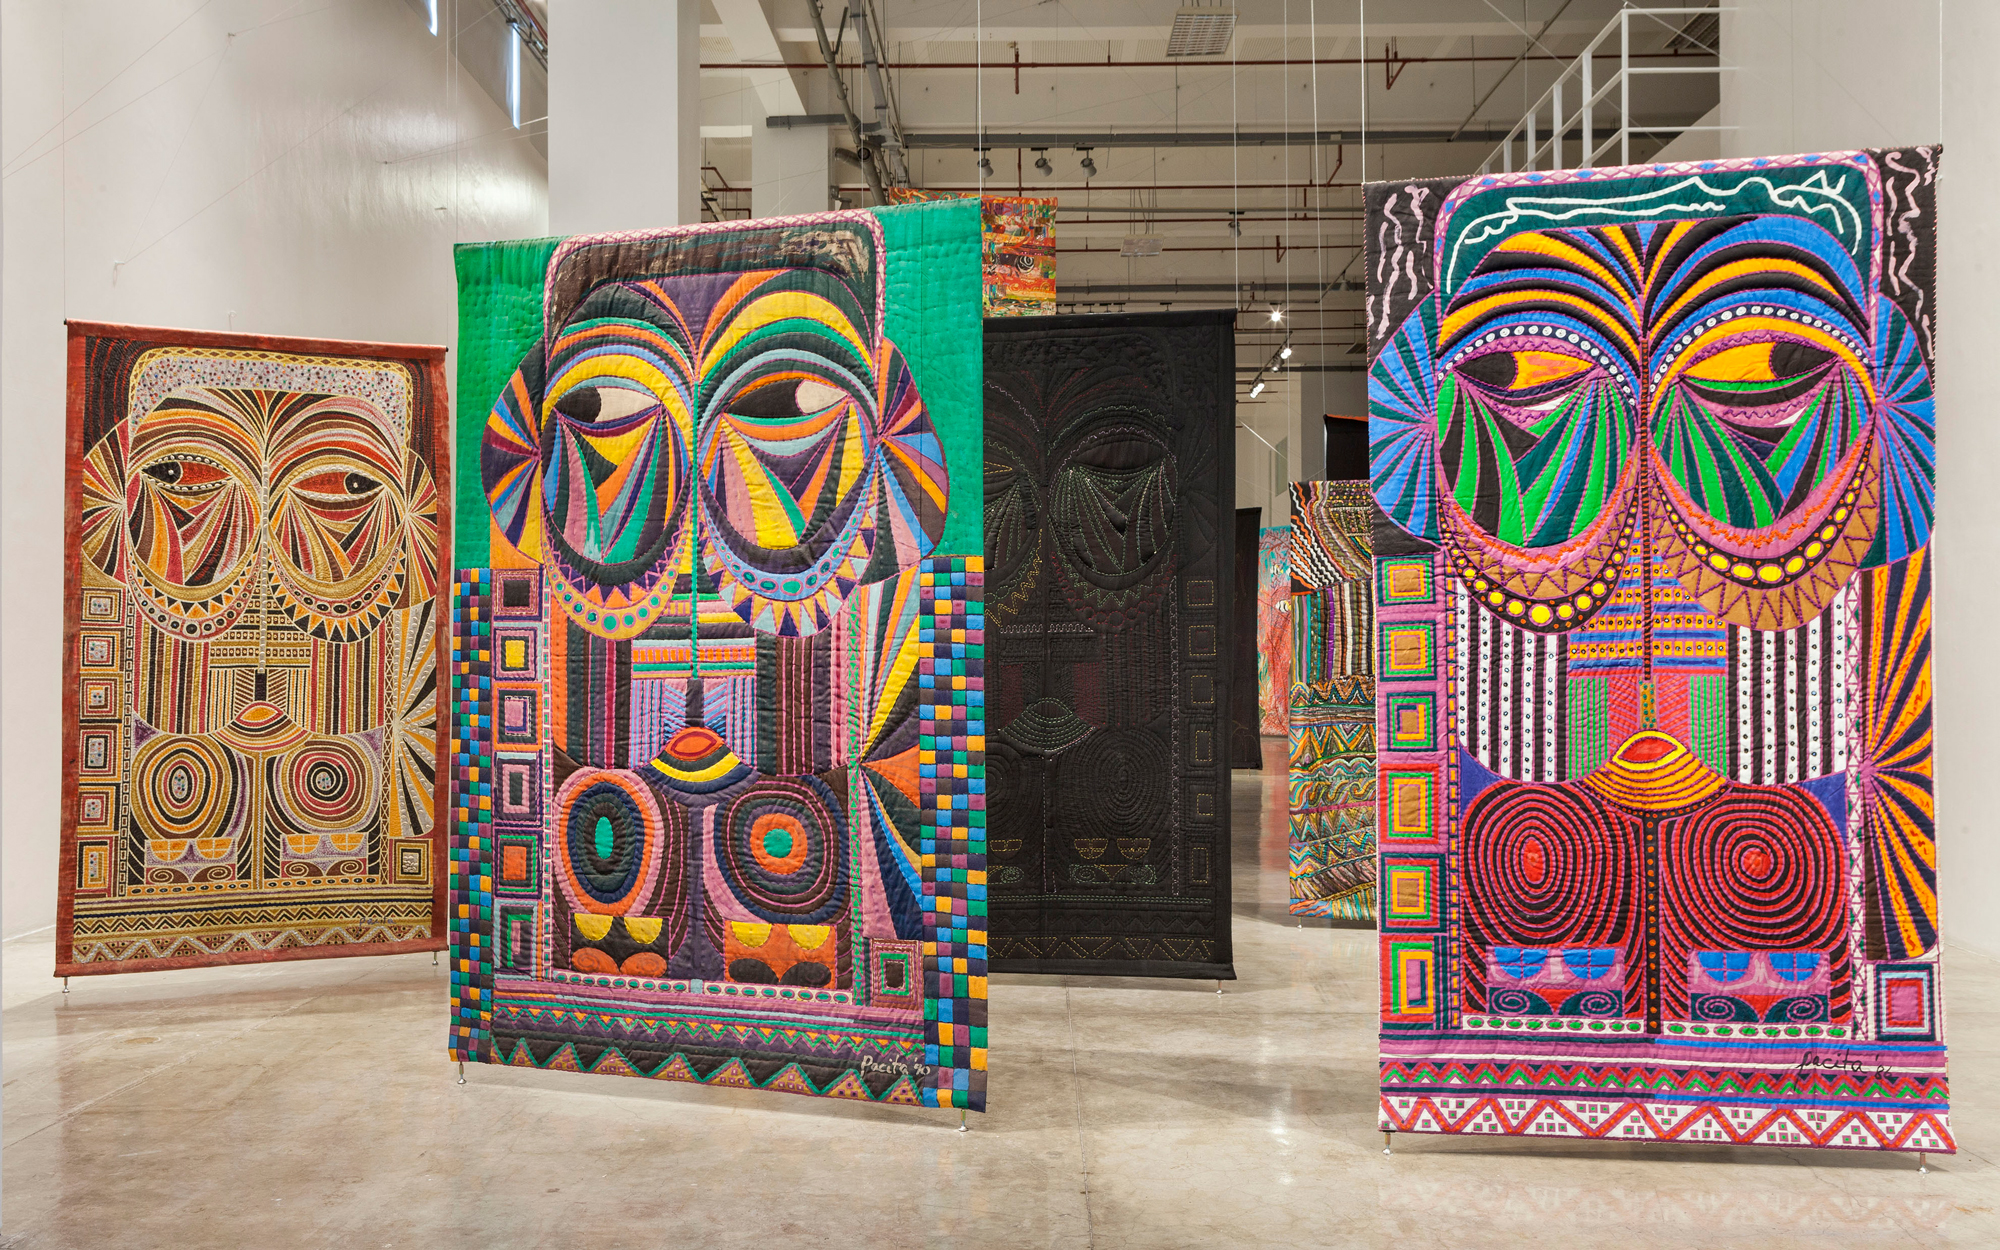 Large gallery space with hanging colorful textile works with mask-like patterns on front and black backing with some stitching visible